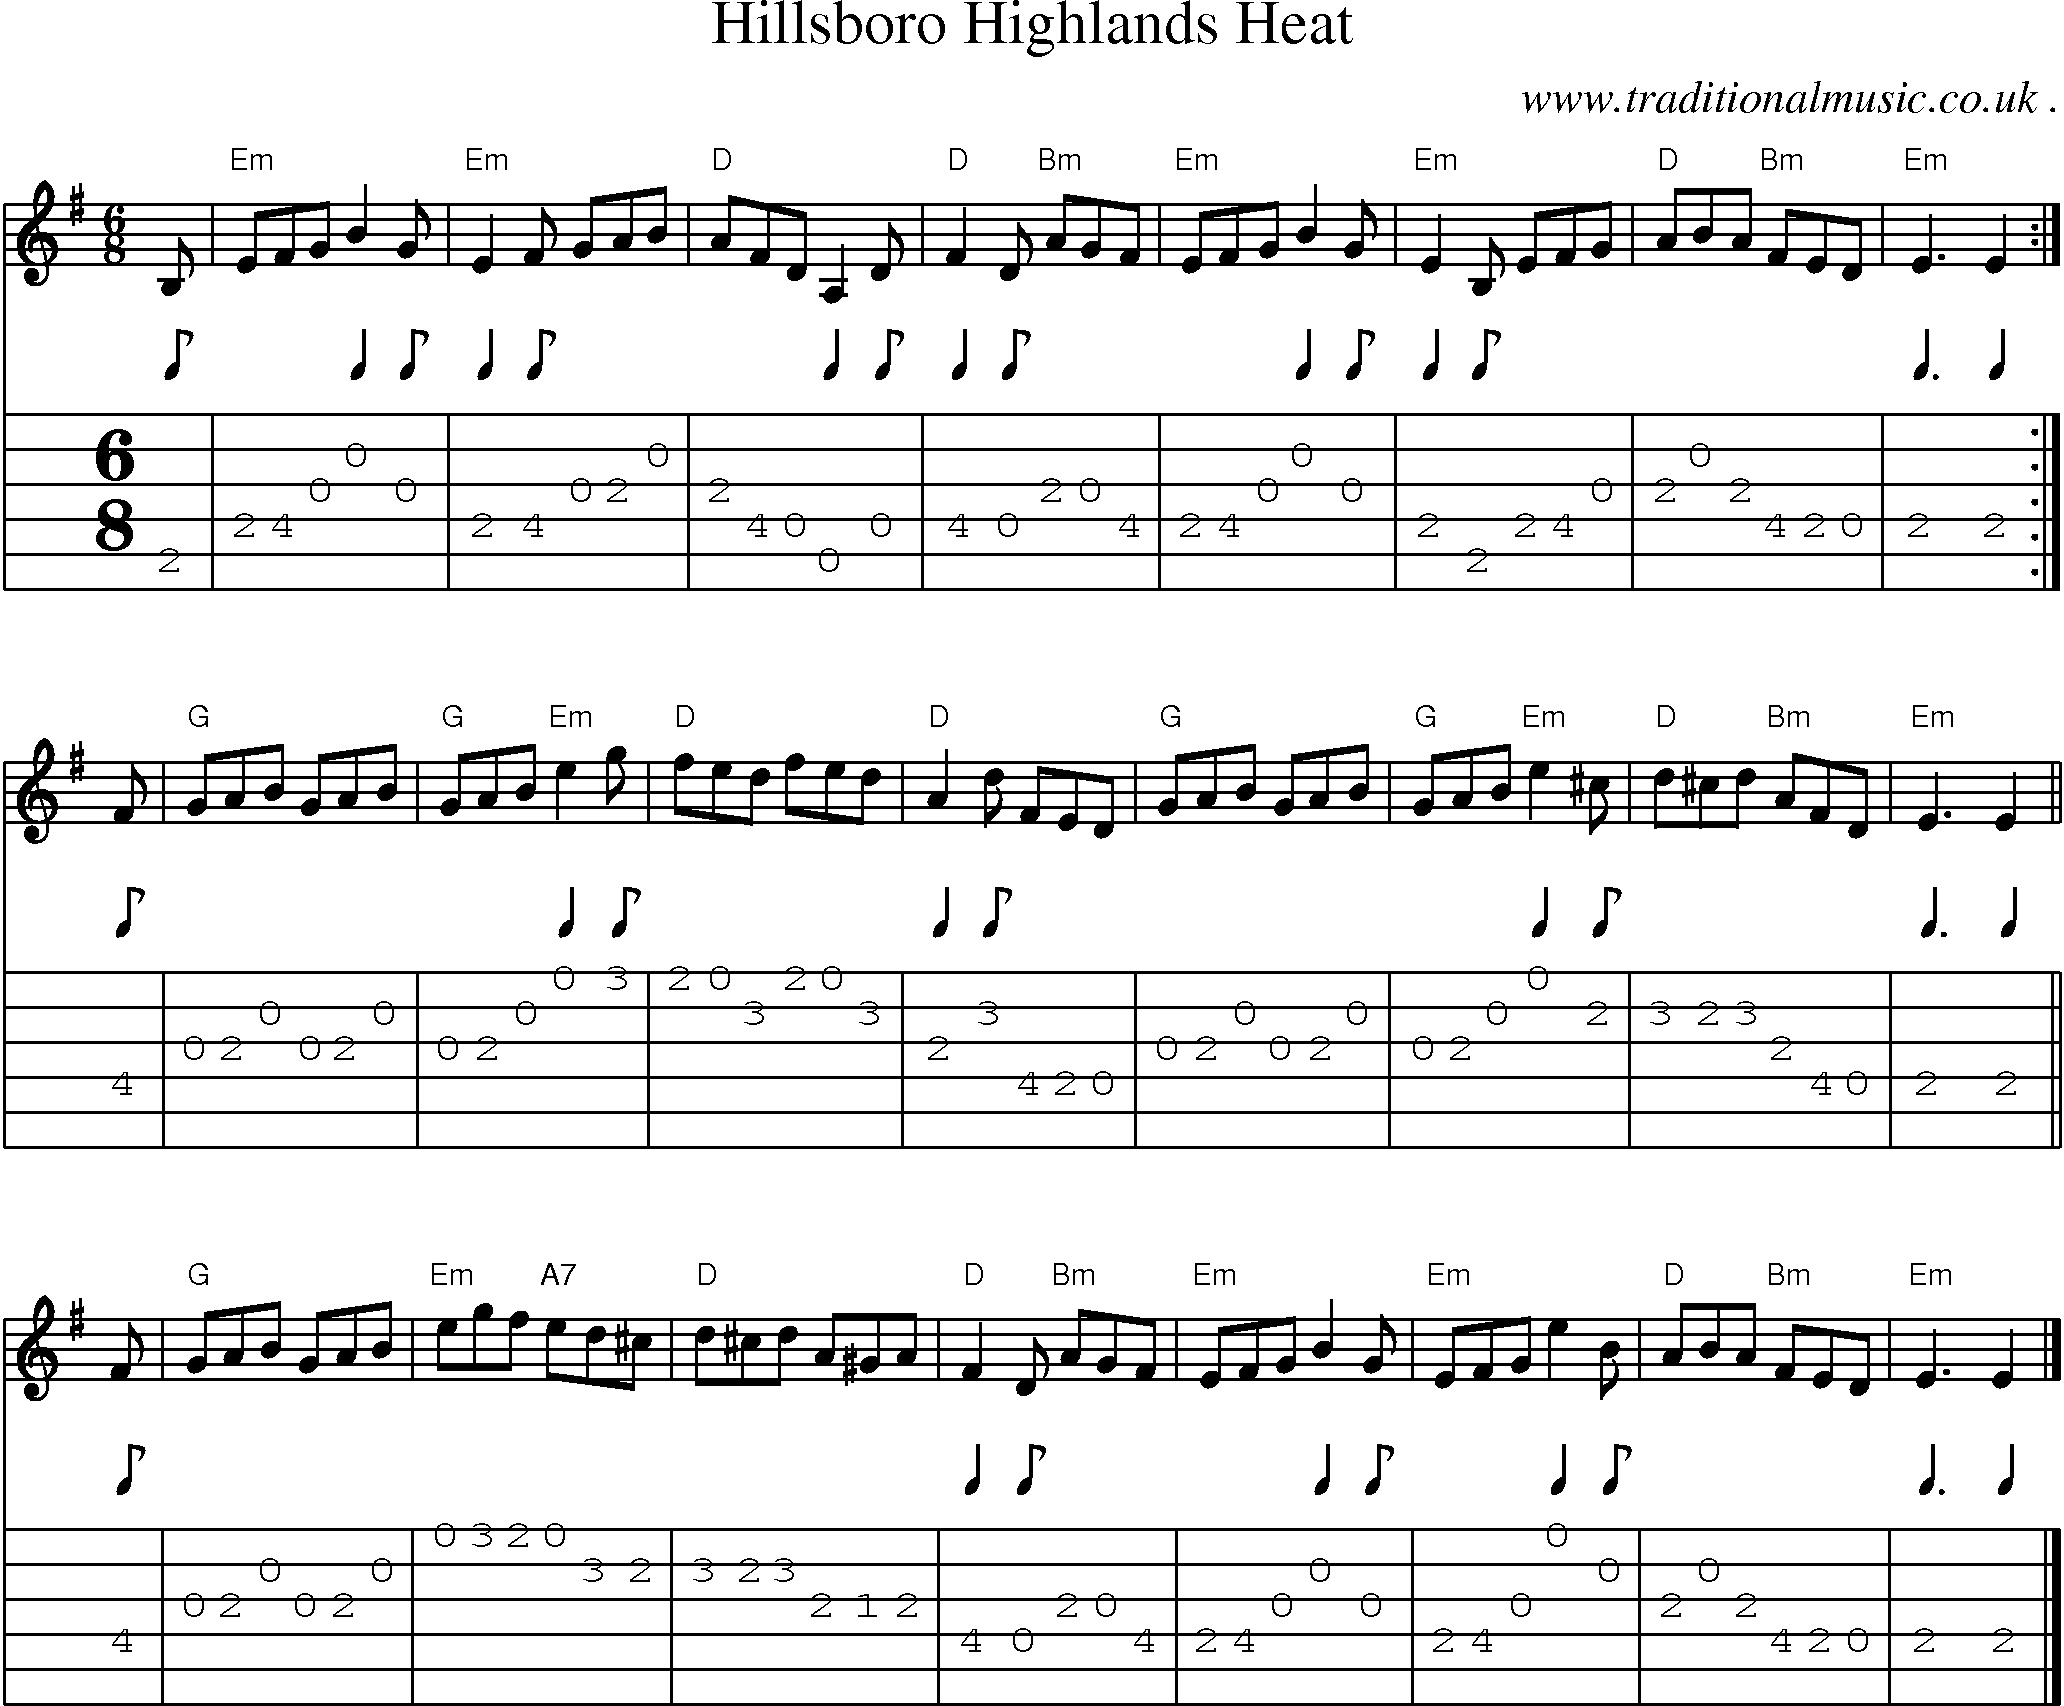 Sheet-music  score, Chords and Guitar Tabs for Hillsboro Highlands Heat